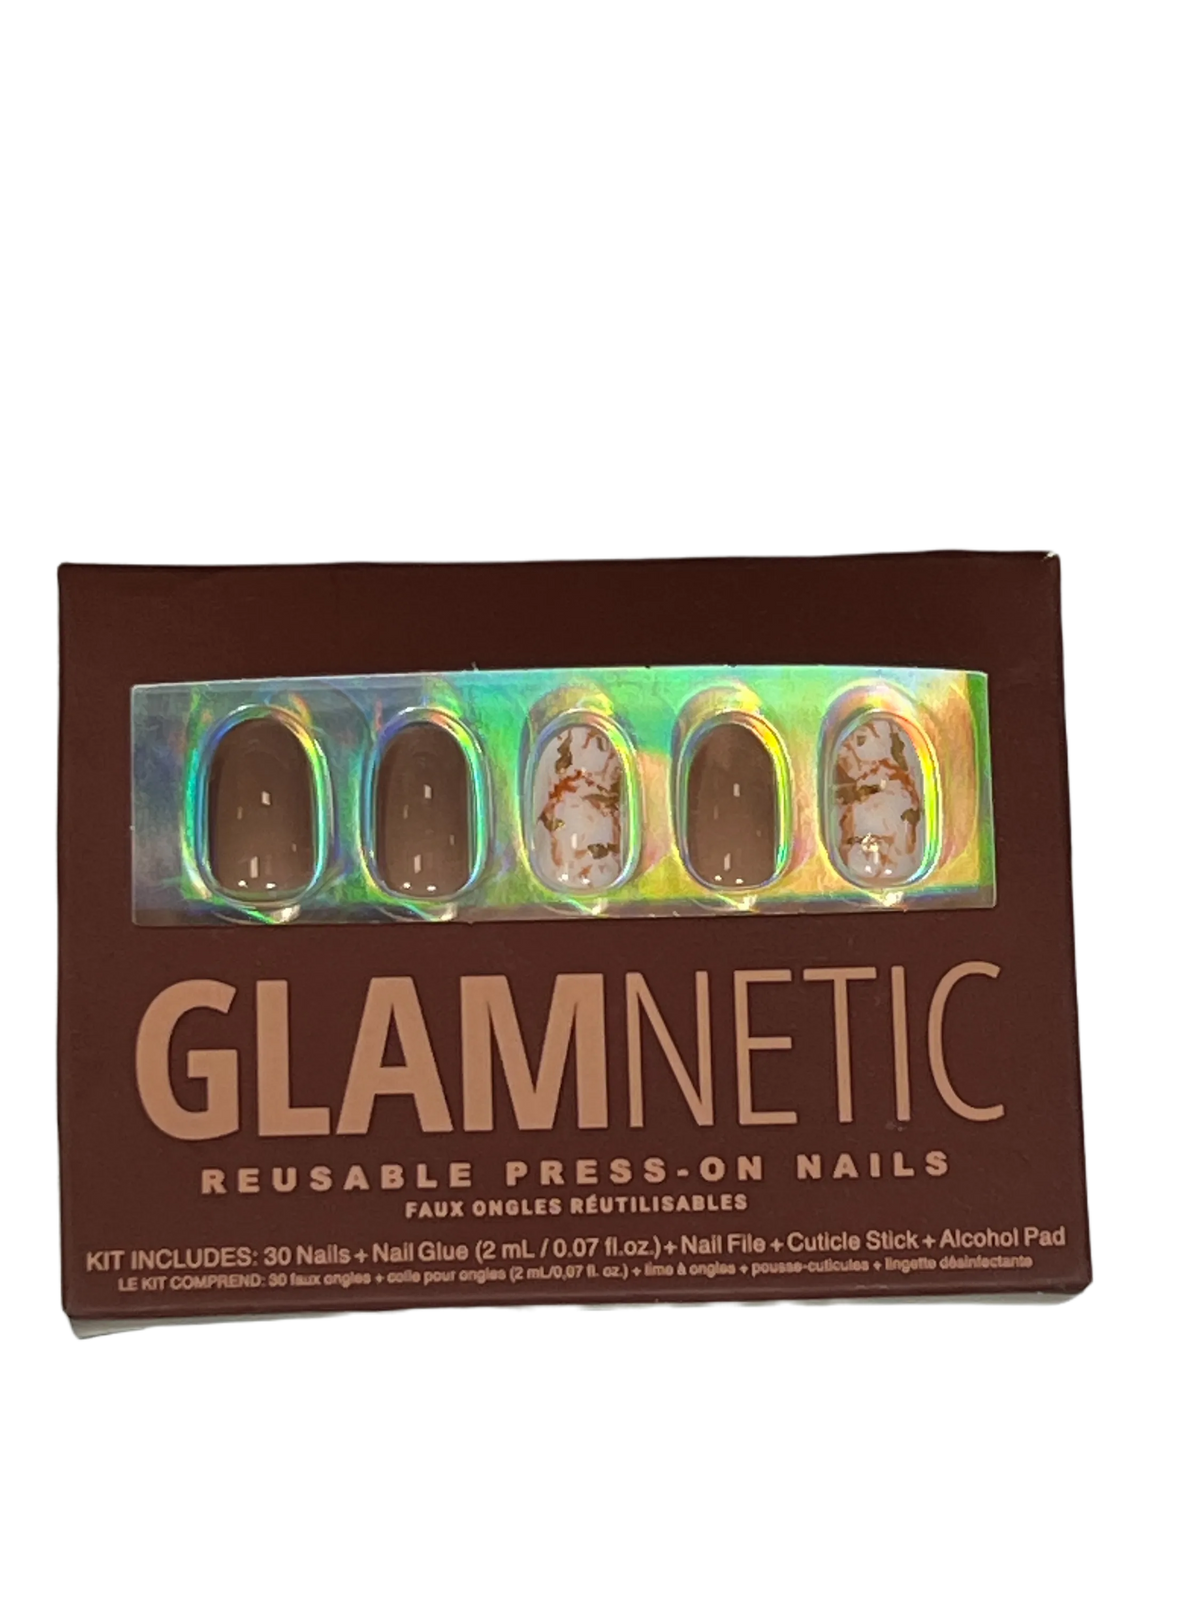 Glamnetic Press On Nails in Brown - NEW